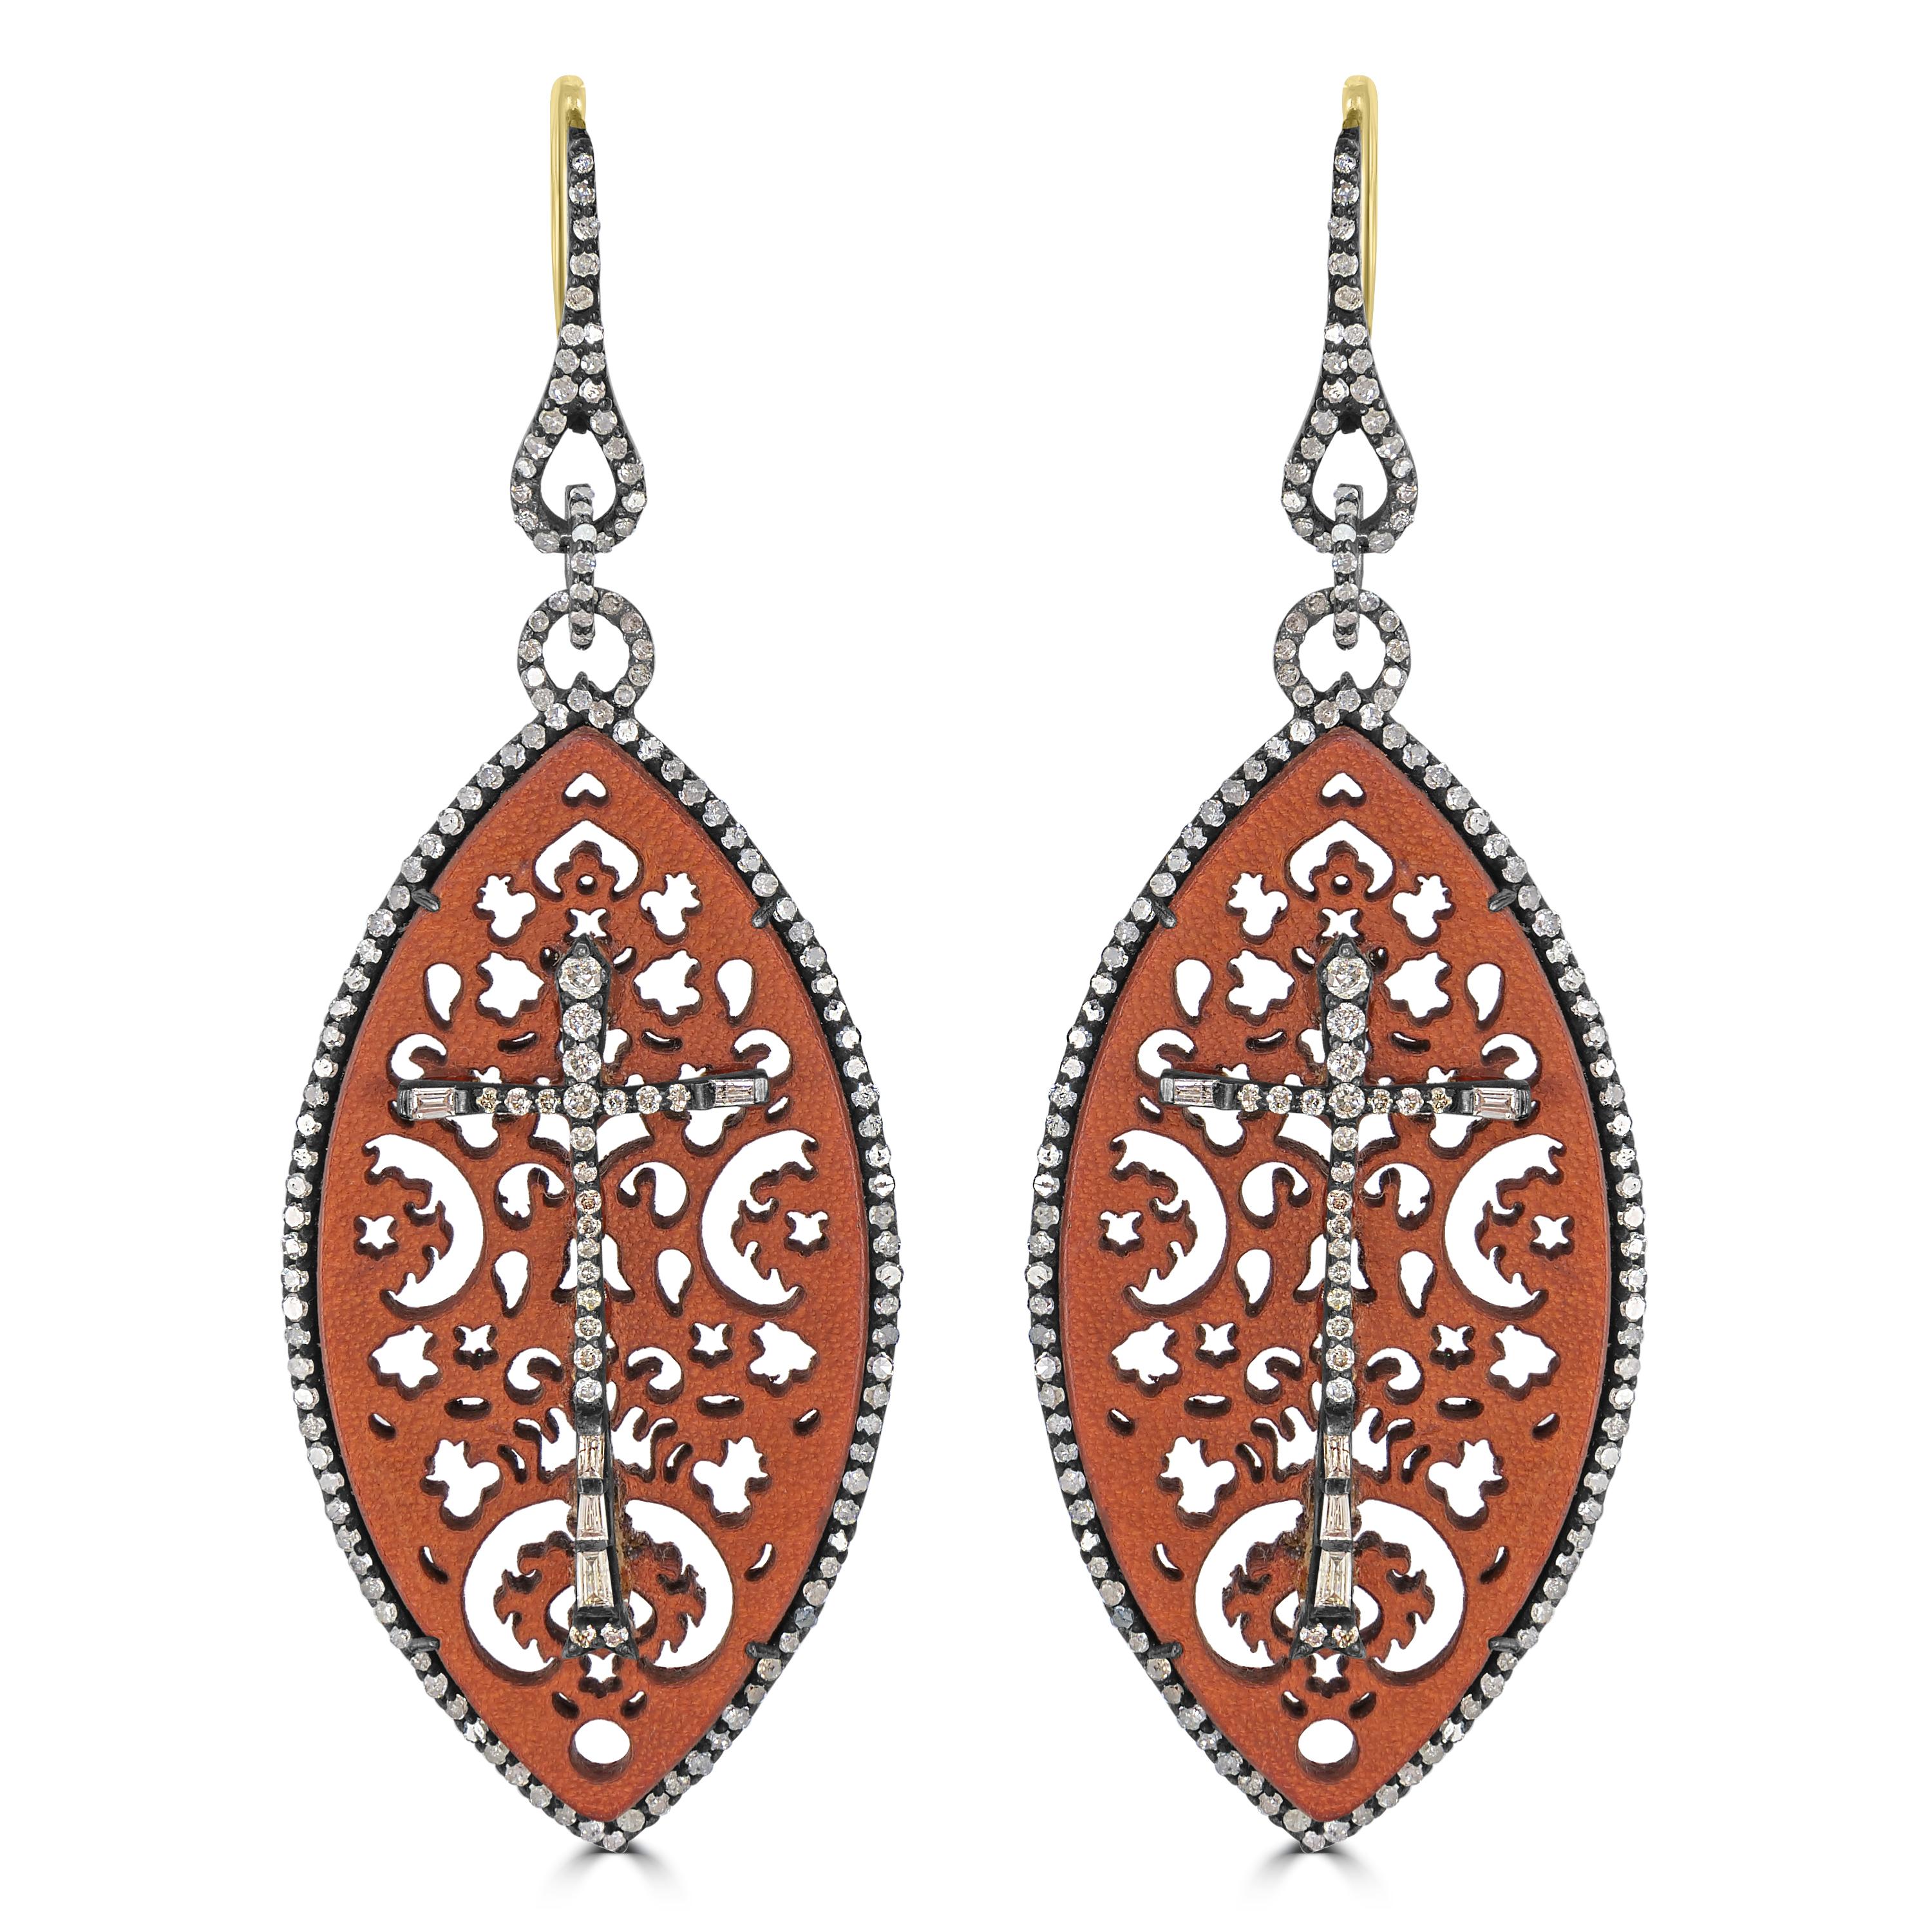 Victorian 3.19 Cttw. Filigree Drop Earrings in 18k Gold and Sterling Silver In New Condition For Sale In New York, NY